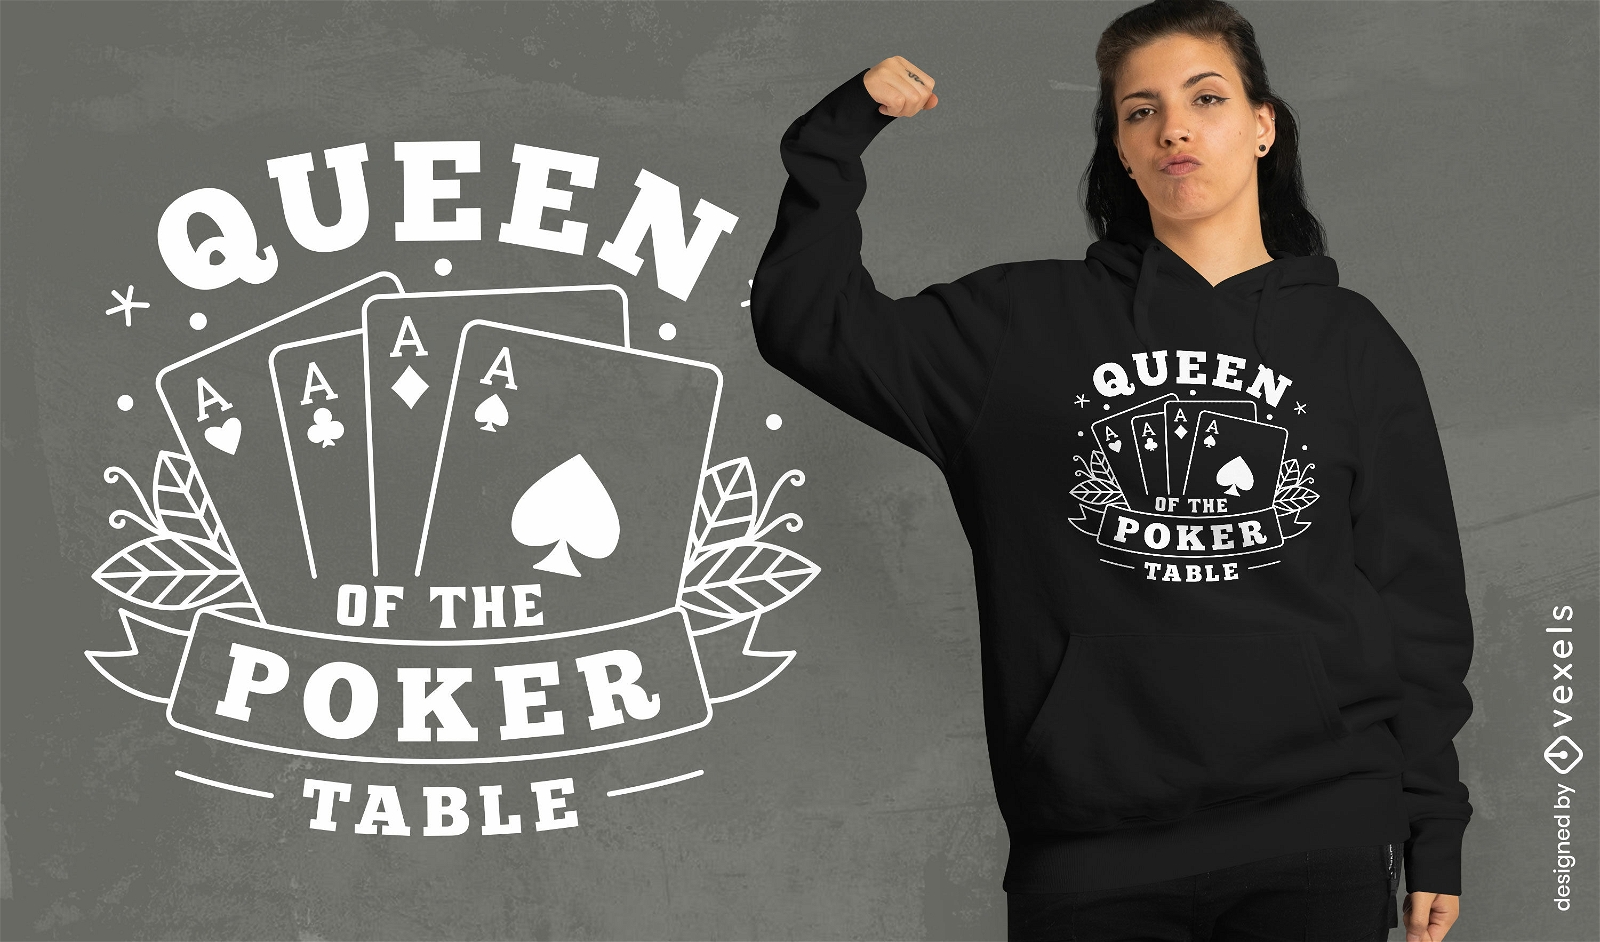 Queen of the poker table t-shirt design